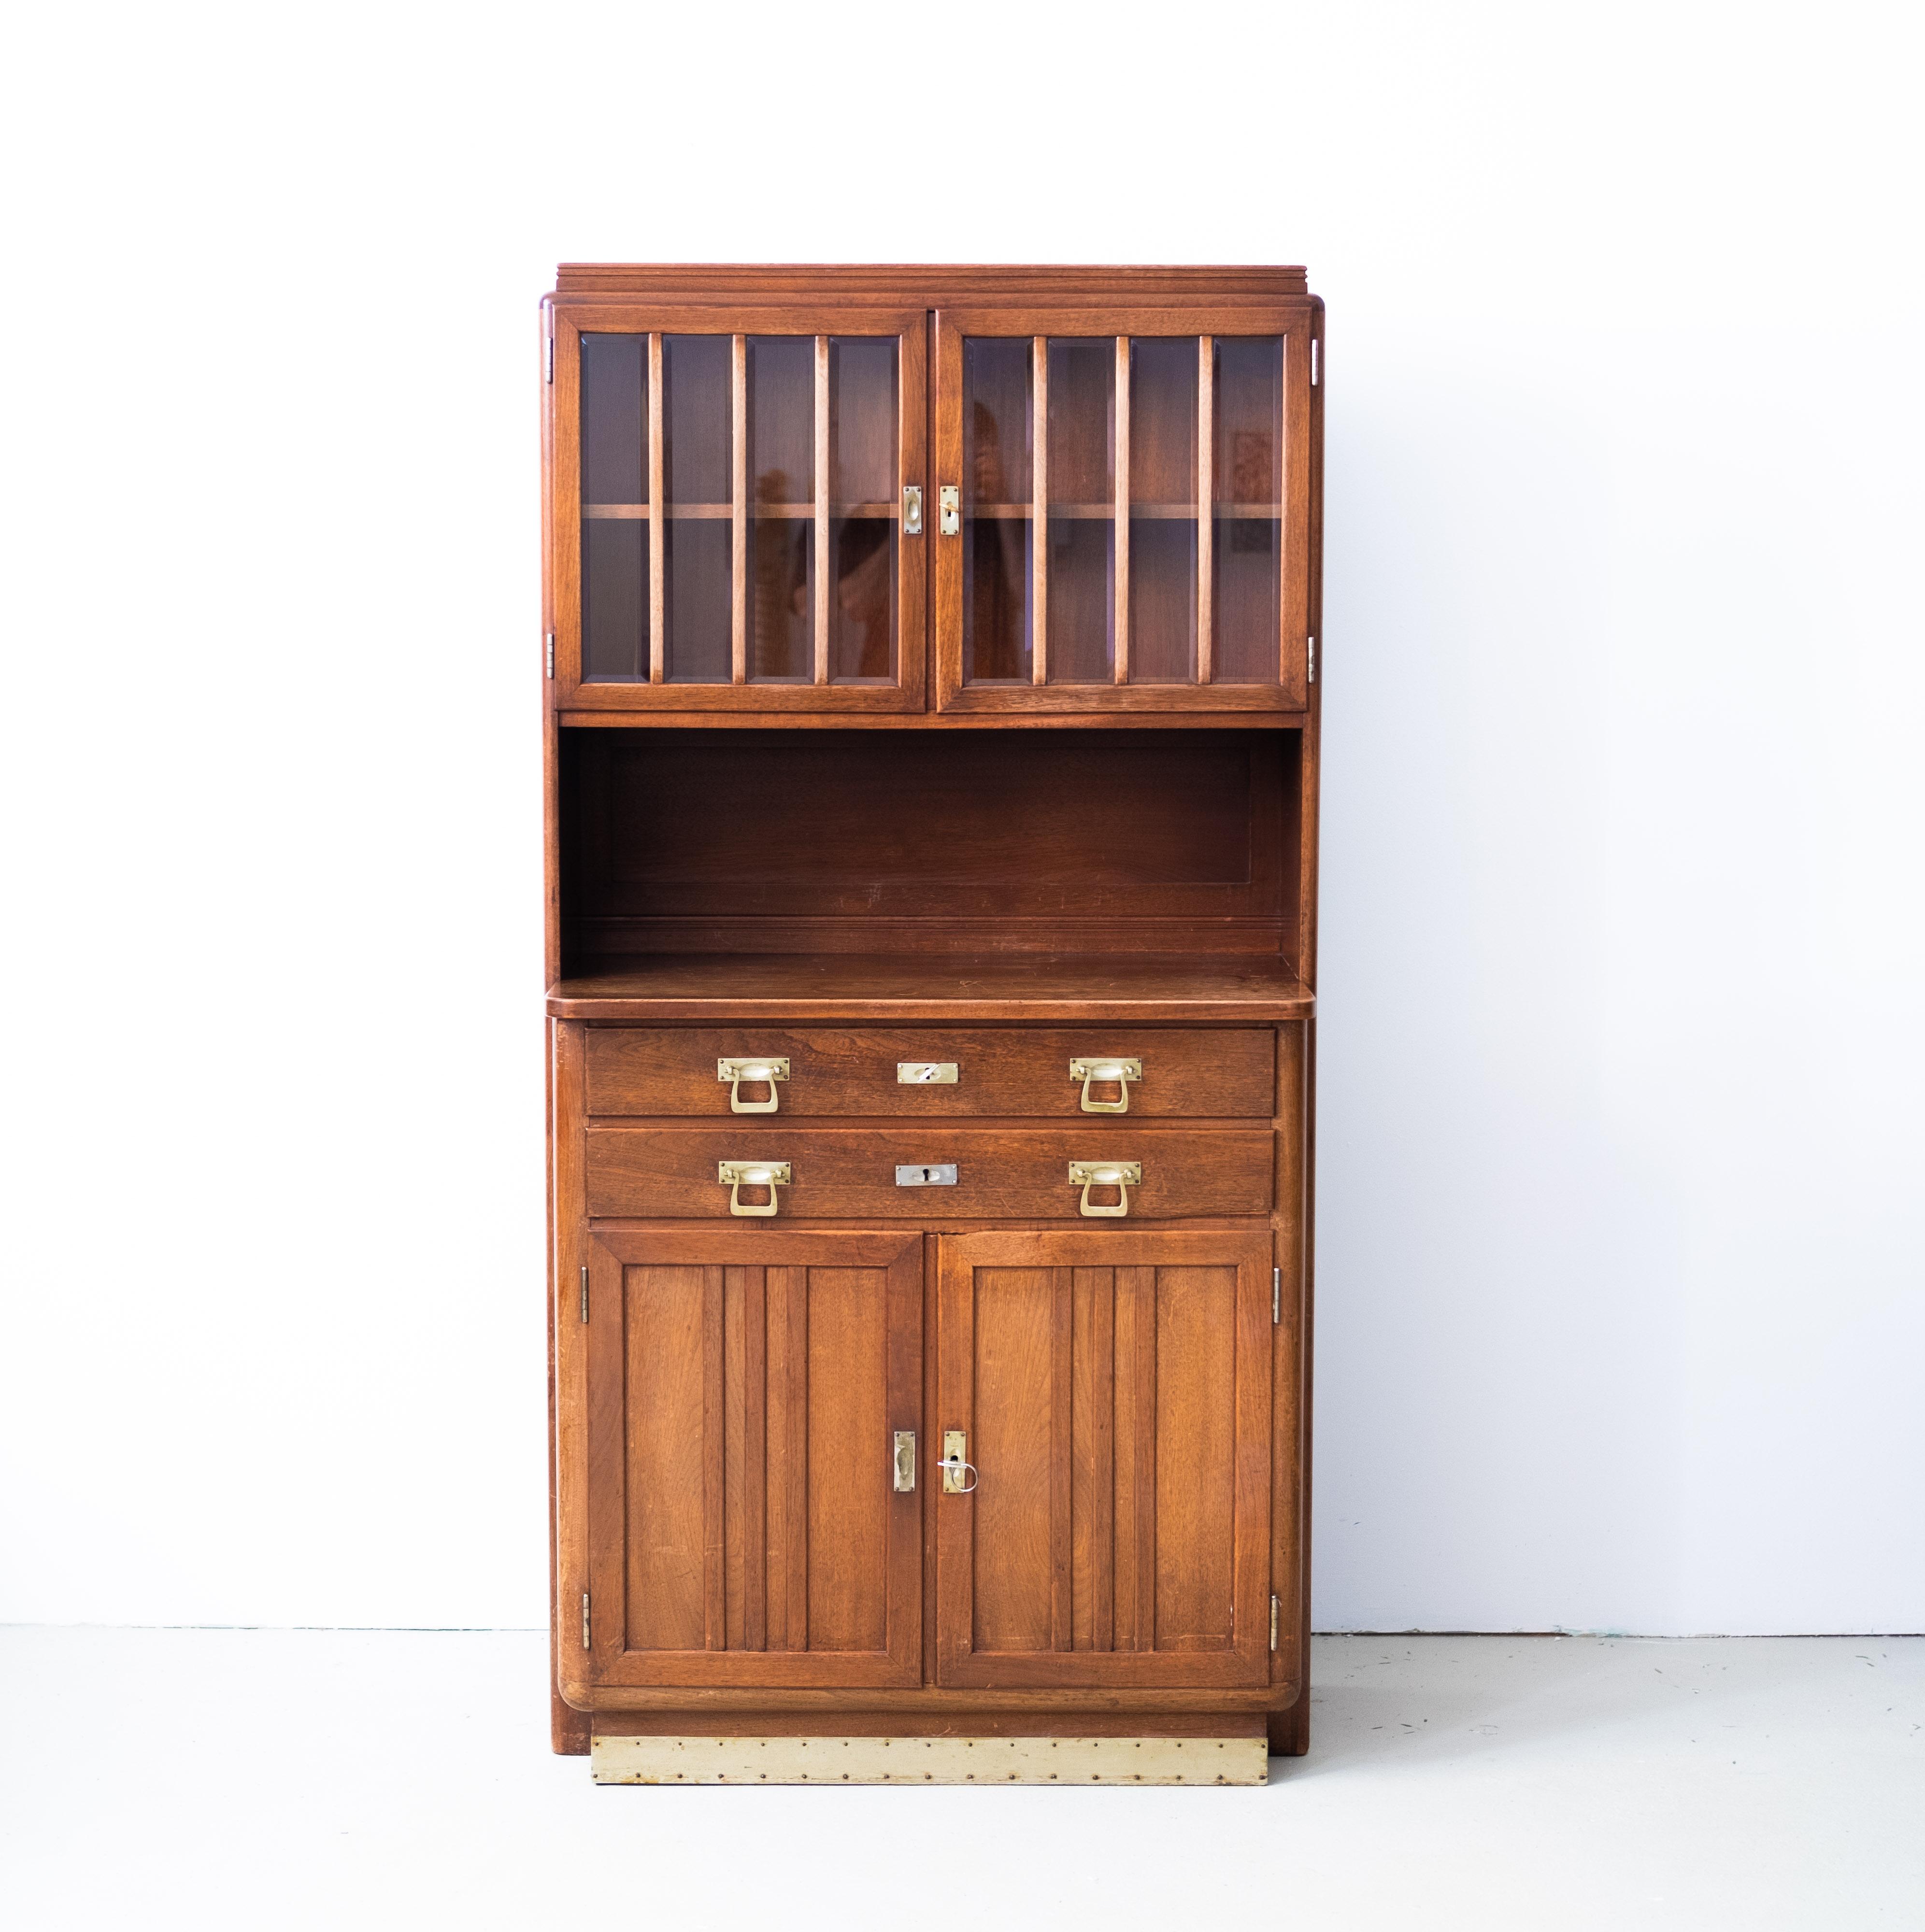 Secessionistic Buffet by Otto Wytrlik, ex. by August Ungethüm (Vienna, 1905 For Sale 2